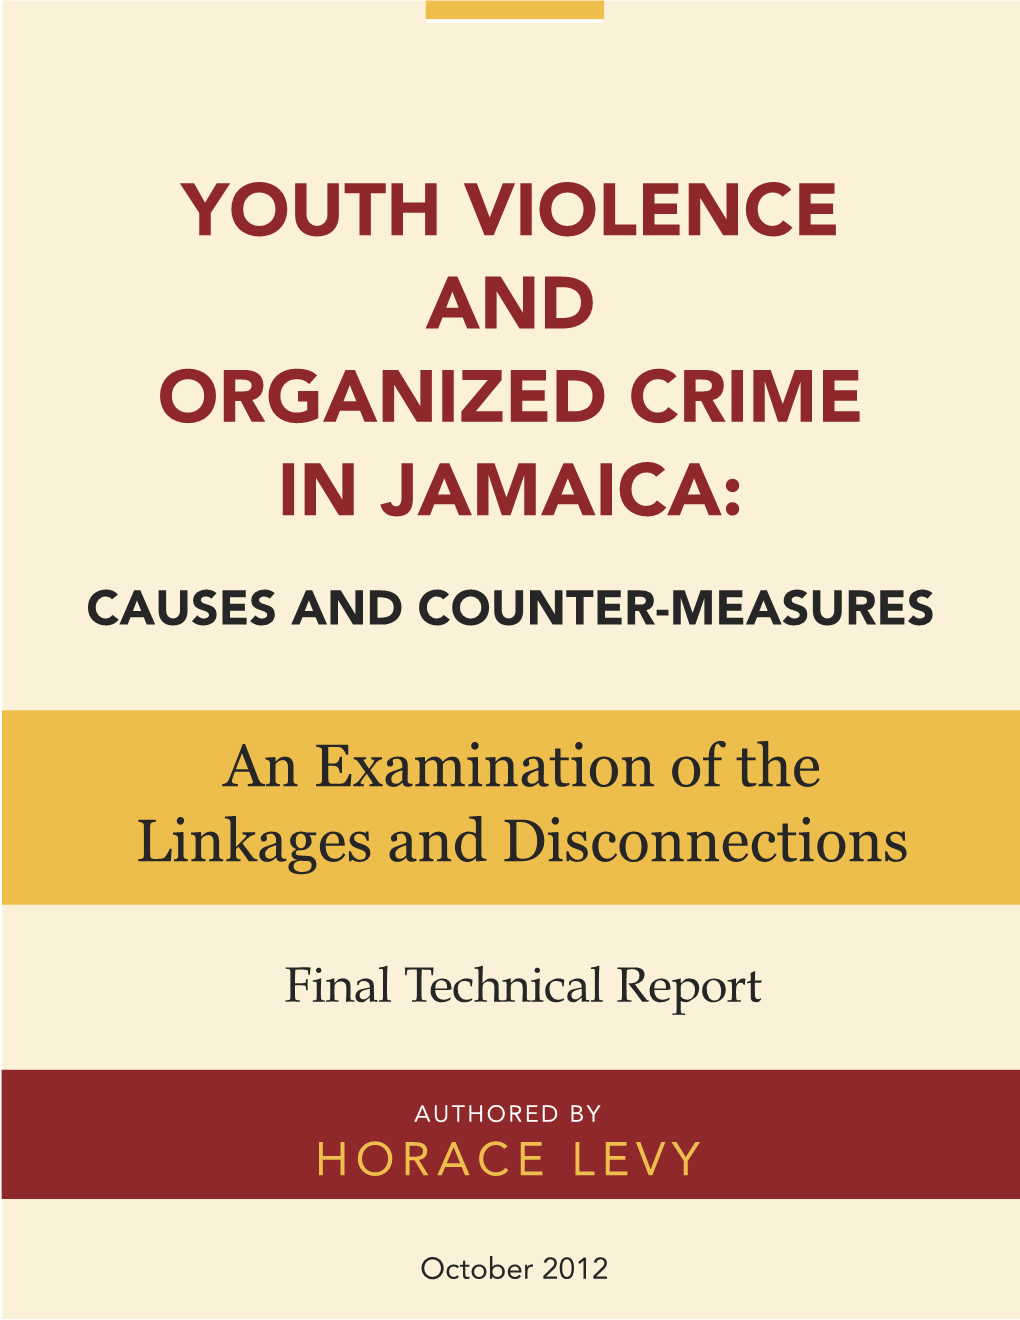 Youth Violence and Organized Crime in Jamaica